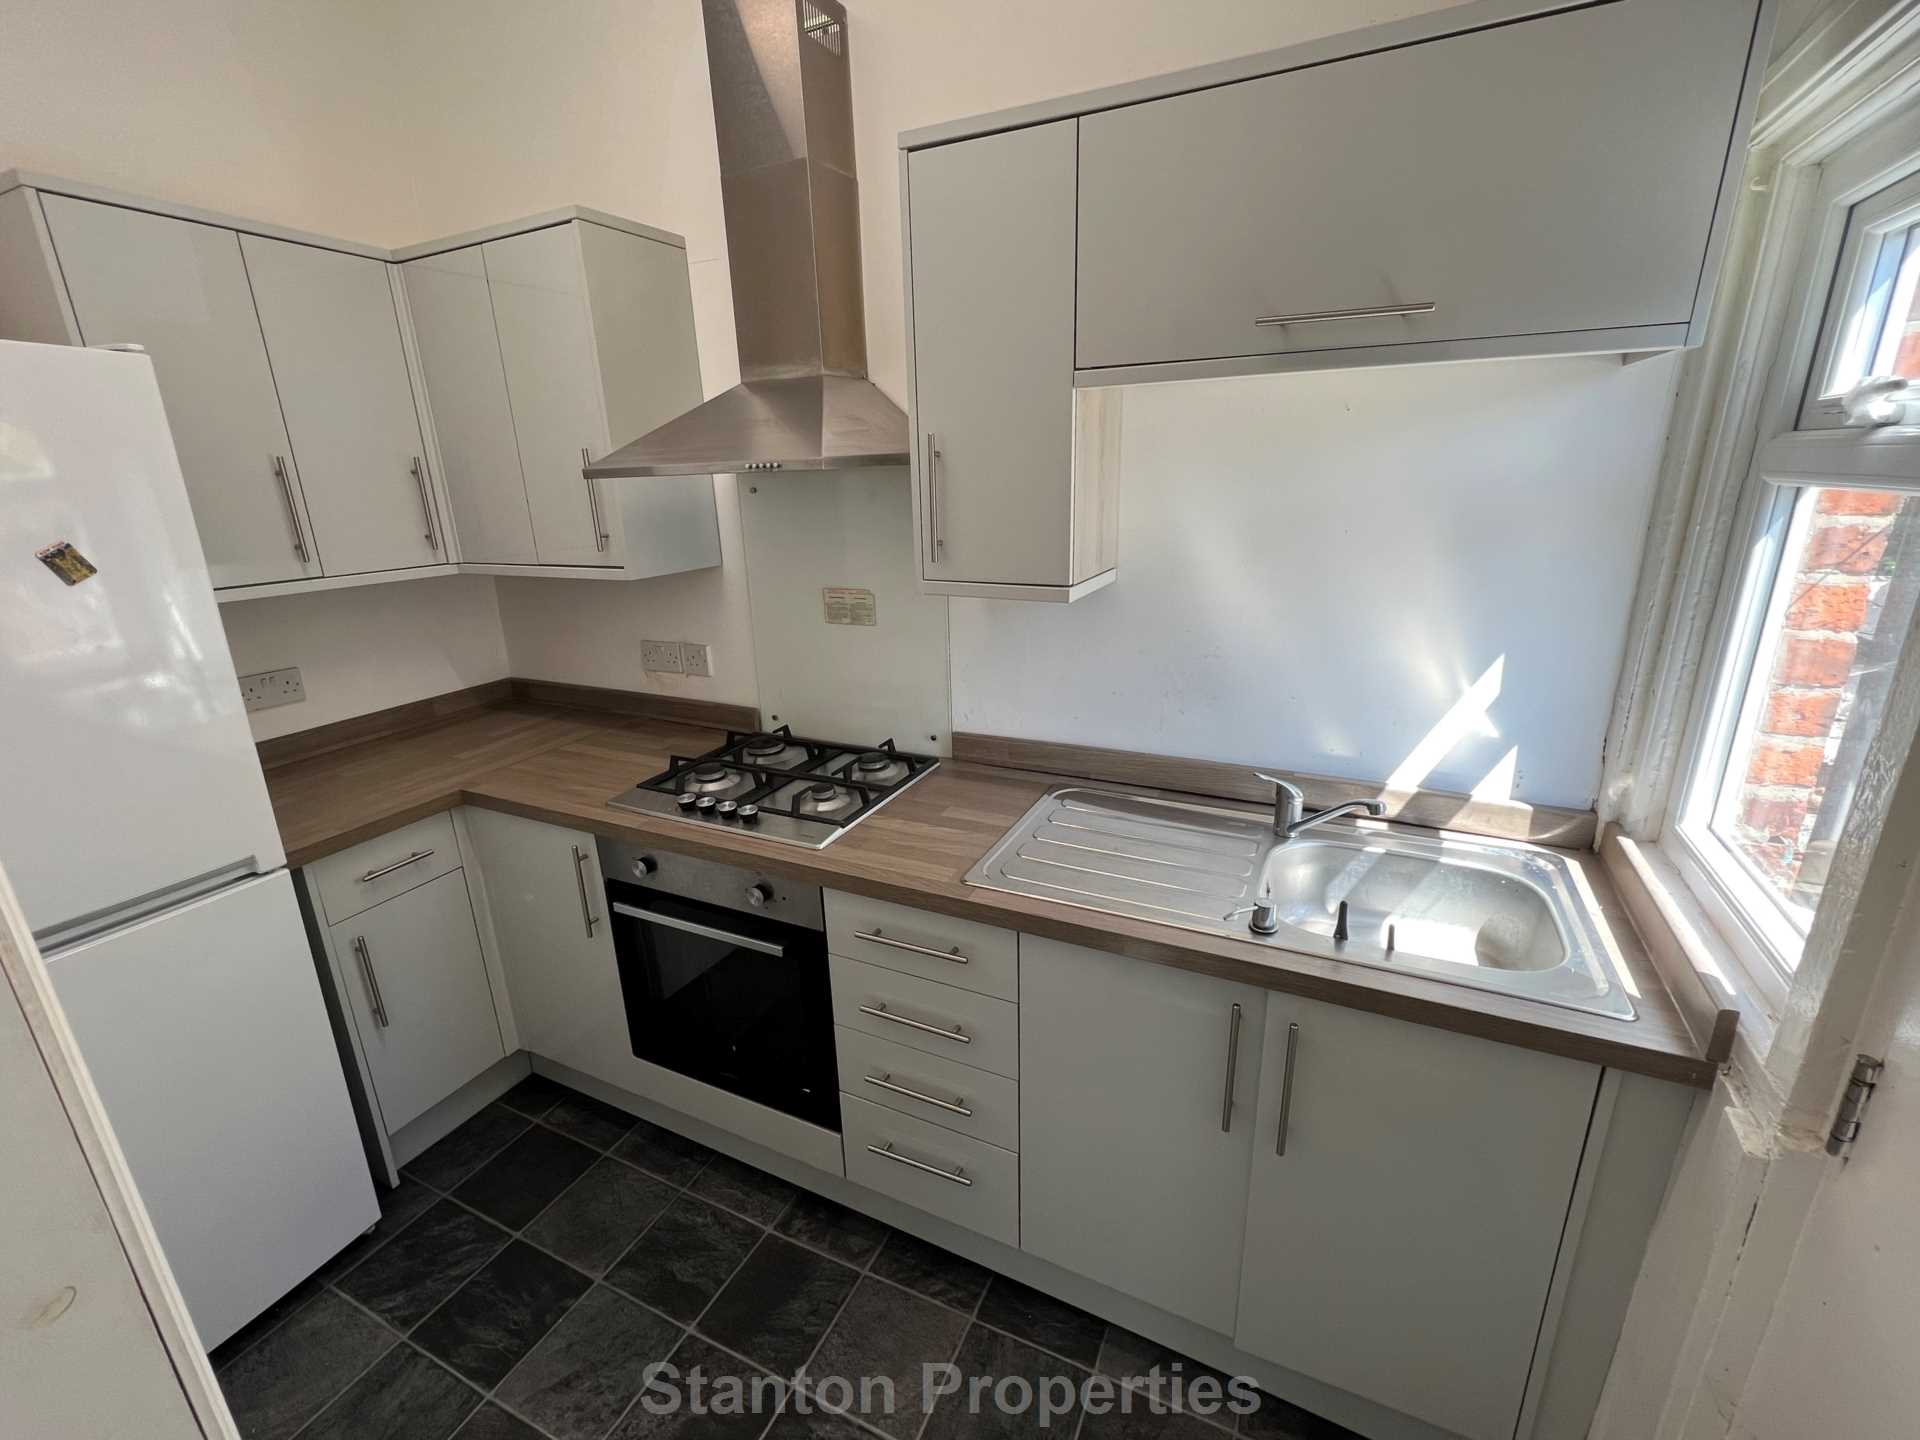 3 bed End Terraced House for rent in Manchester. From Stanton Properties